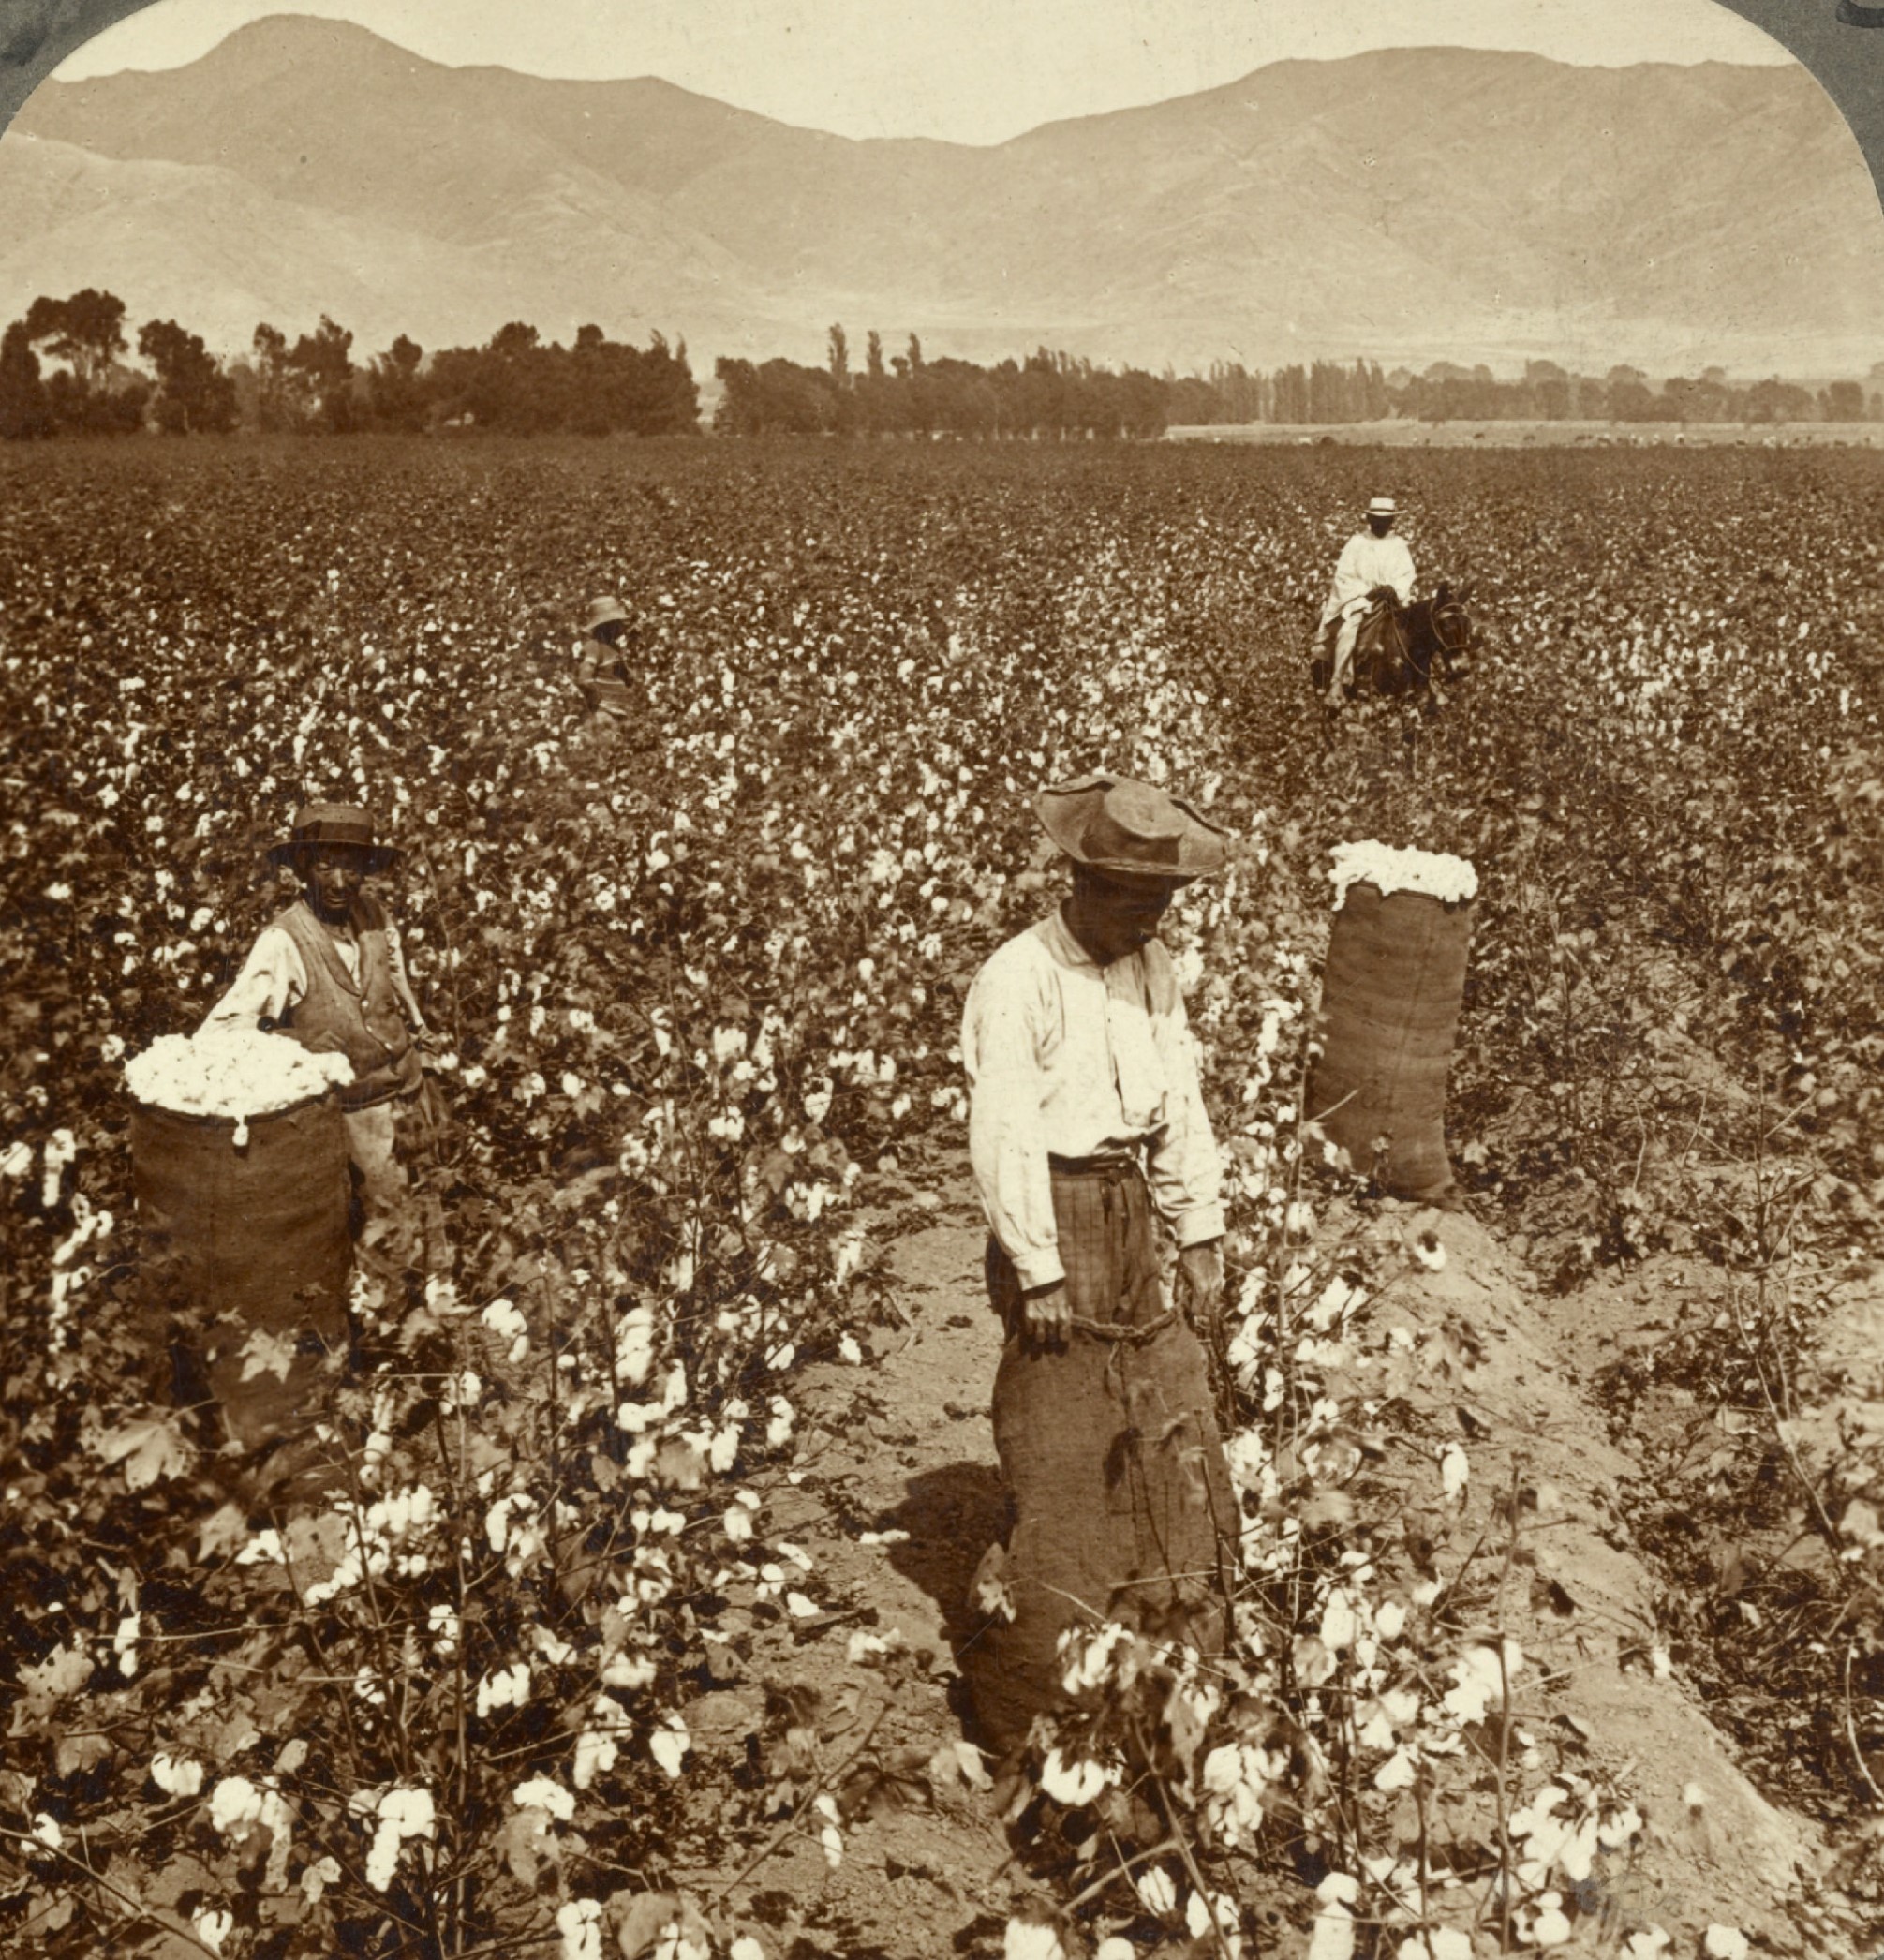 Chinese laborers on a cotton plantation in Peru, 1890s.